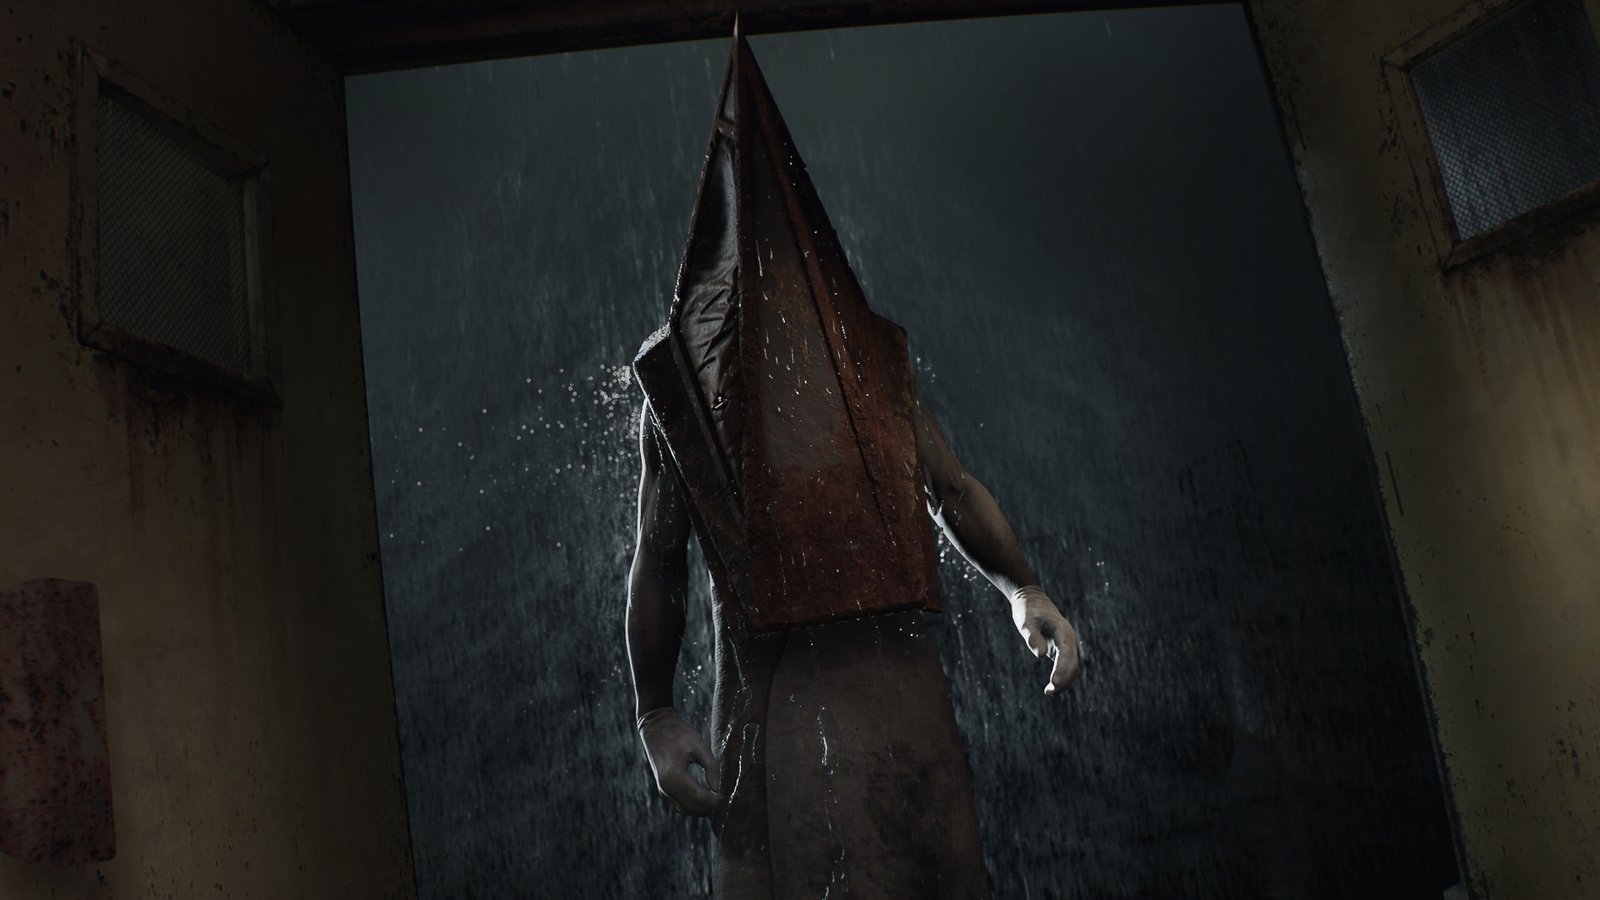 What Layers Of Fear Tells Us About The Silent Hill 2 Remake